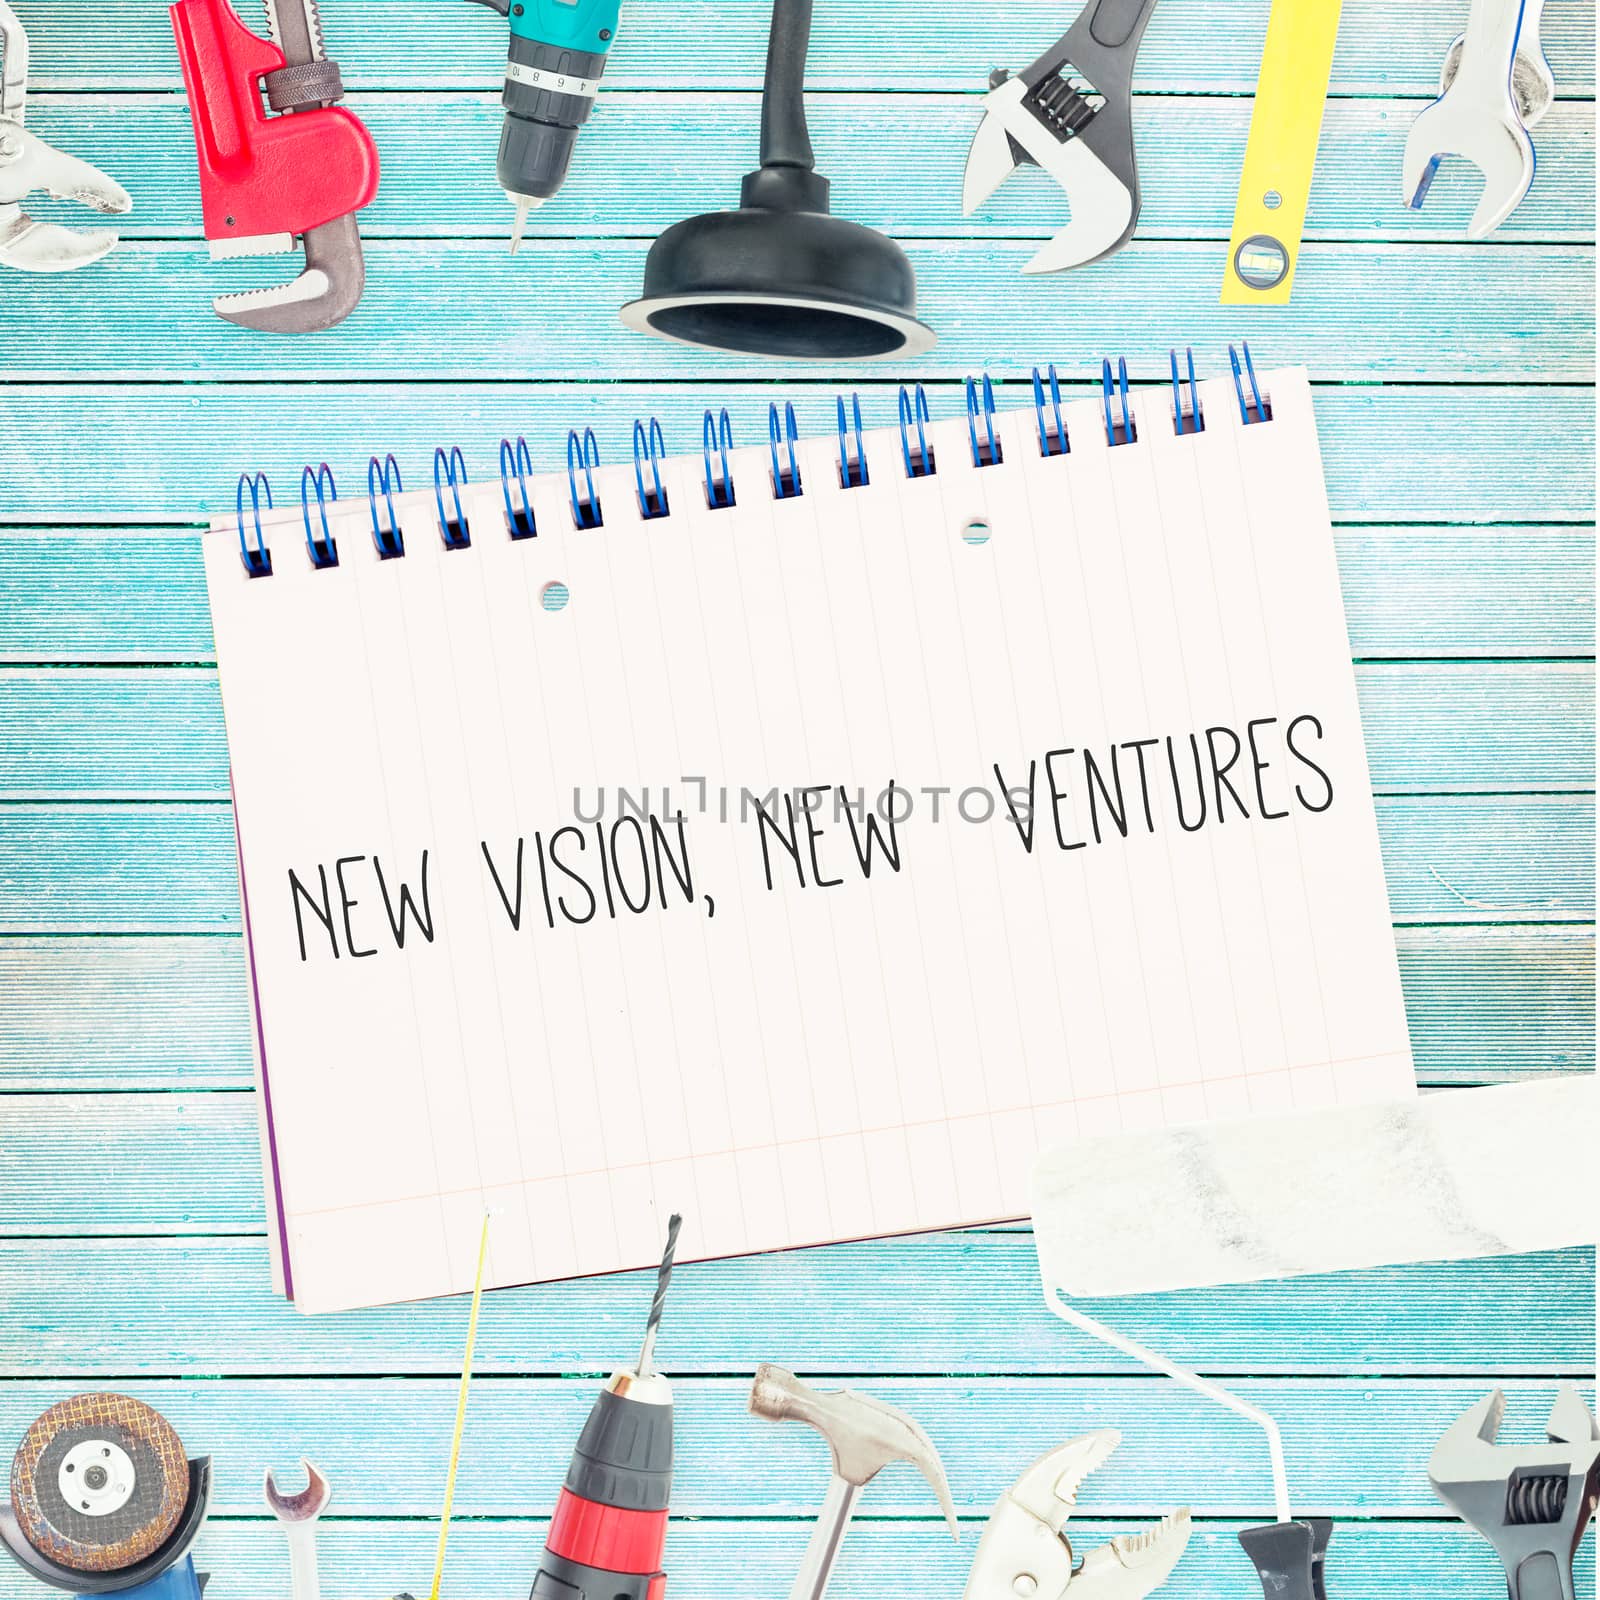 The word new vision, new  ventures against tools and notepad on wooden background